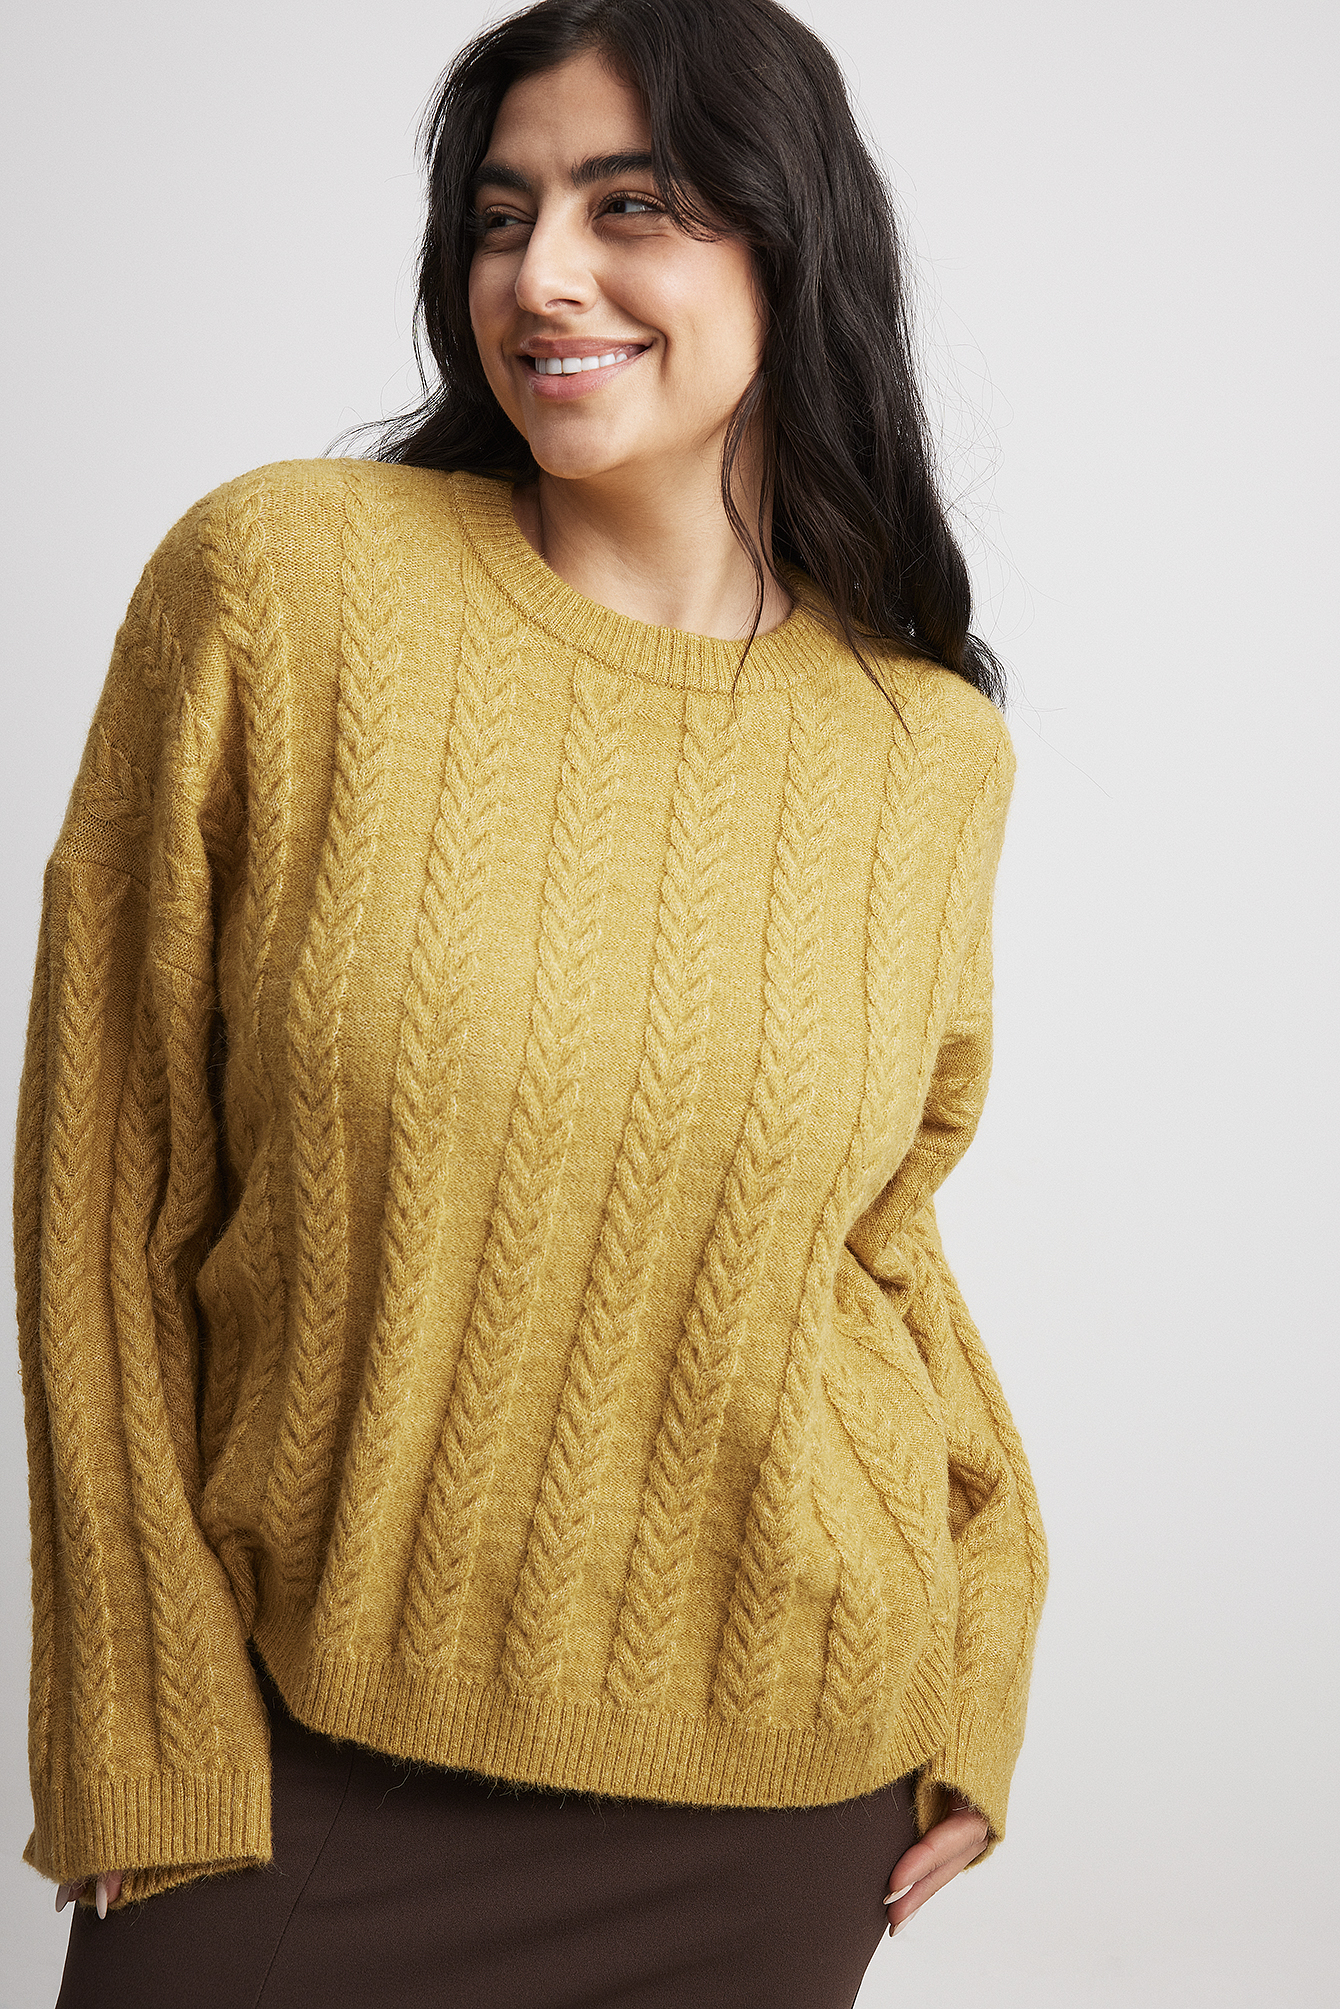 https://www.na-kd.com/globalassets/oversized_knitted_cable_sweater_1100-007858-030415674.jpg?ref=3B6688BCCC